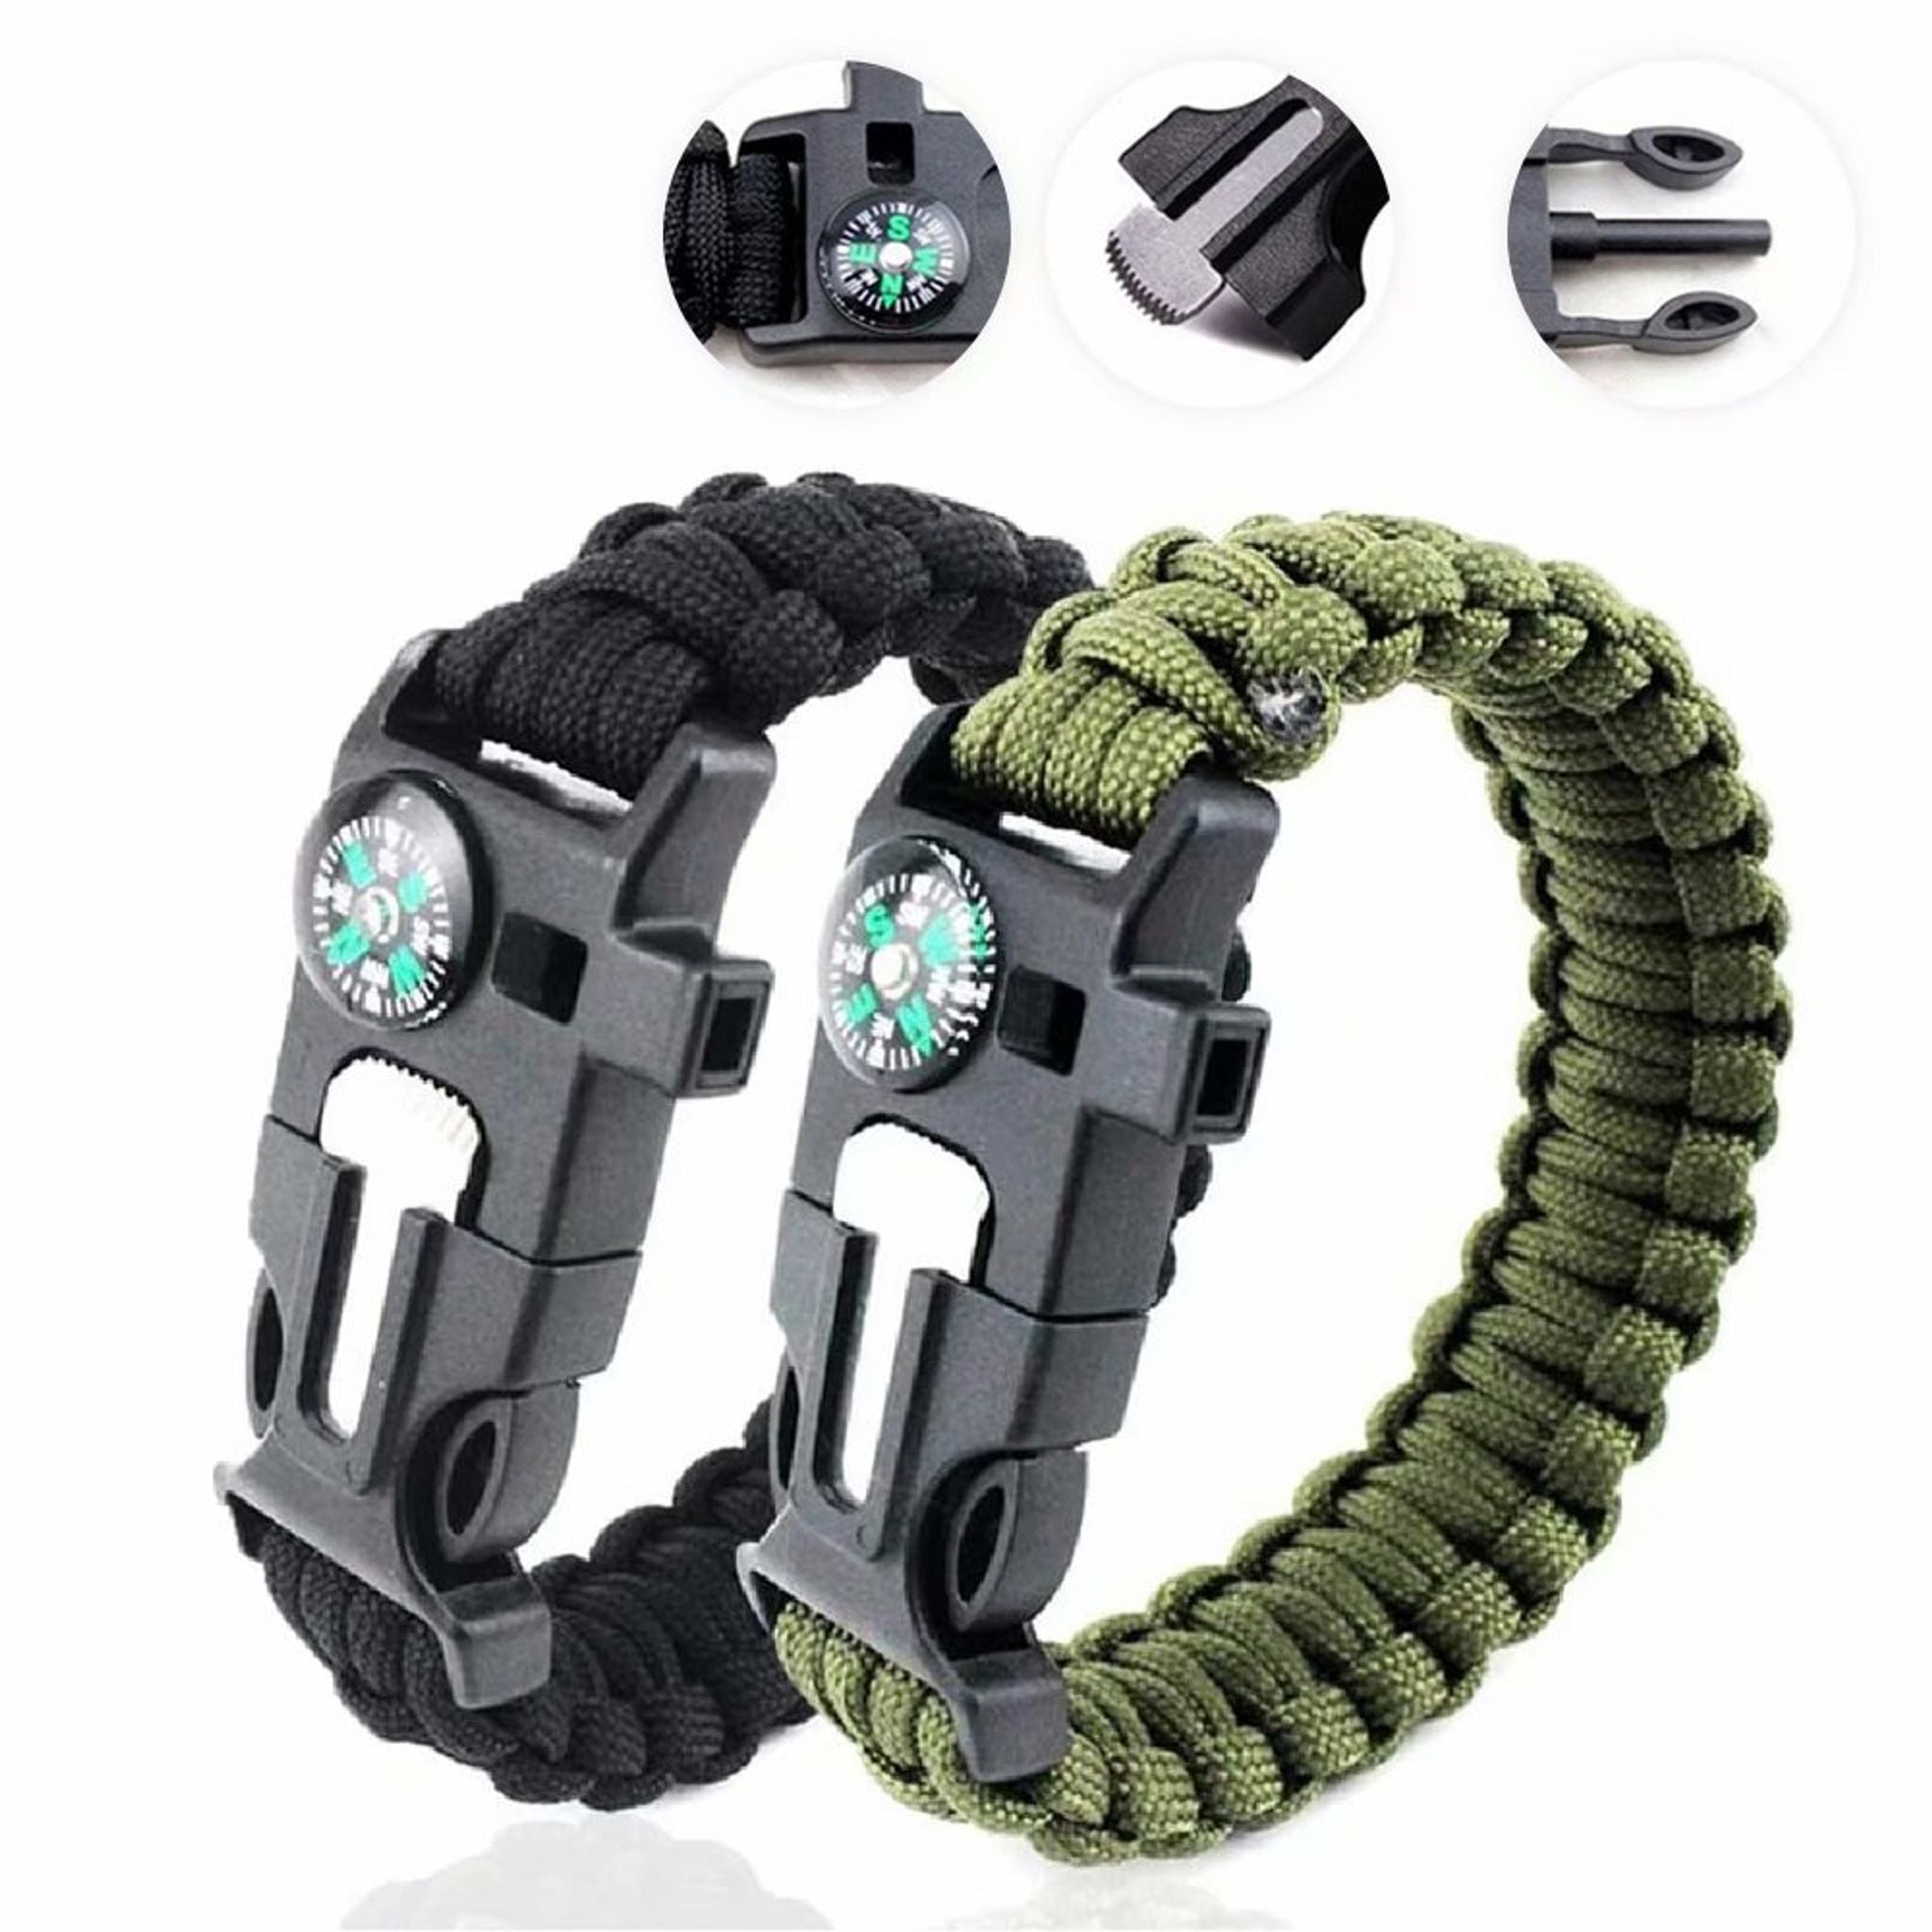 Amazon.com : WUQID Paracord Survival Bracelet Loud Whistle Emergency  Compass Survival Fire Starter Scraper Accessories for Hiking, Camping,  Fishing and Hunting (2 Pack) : Sports & Outdoors